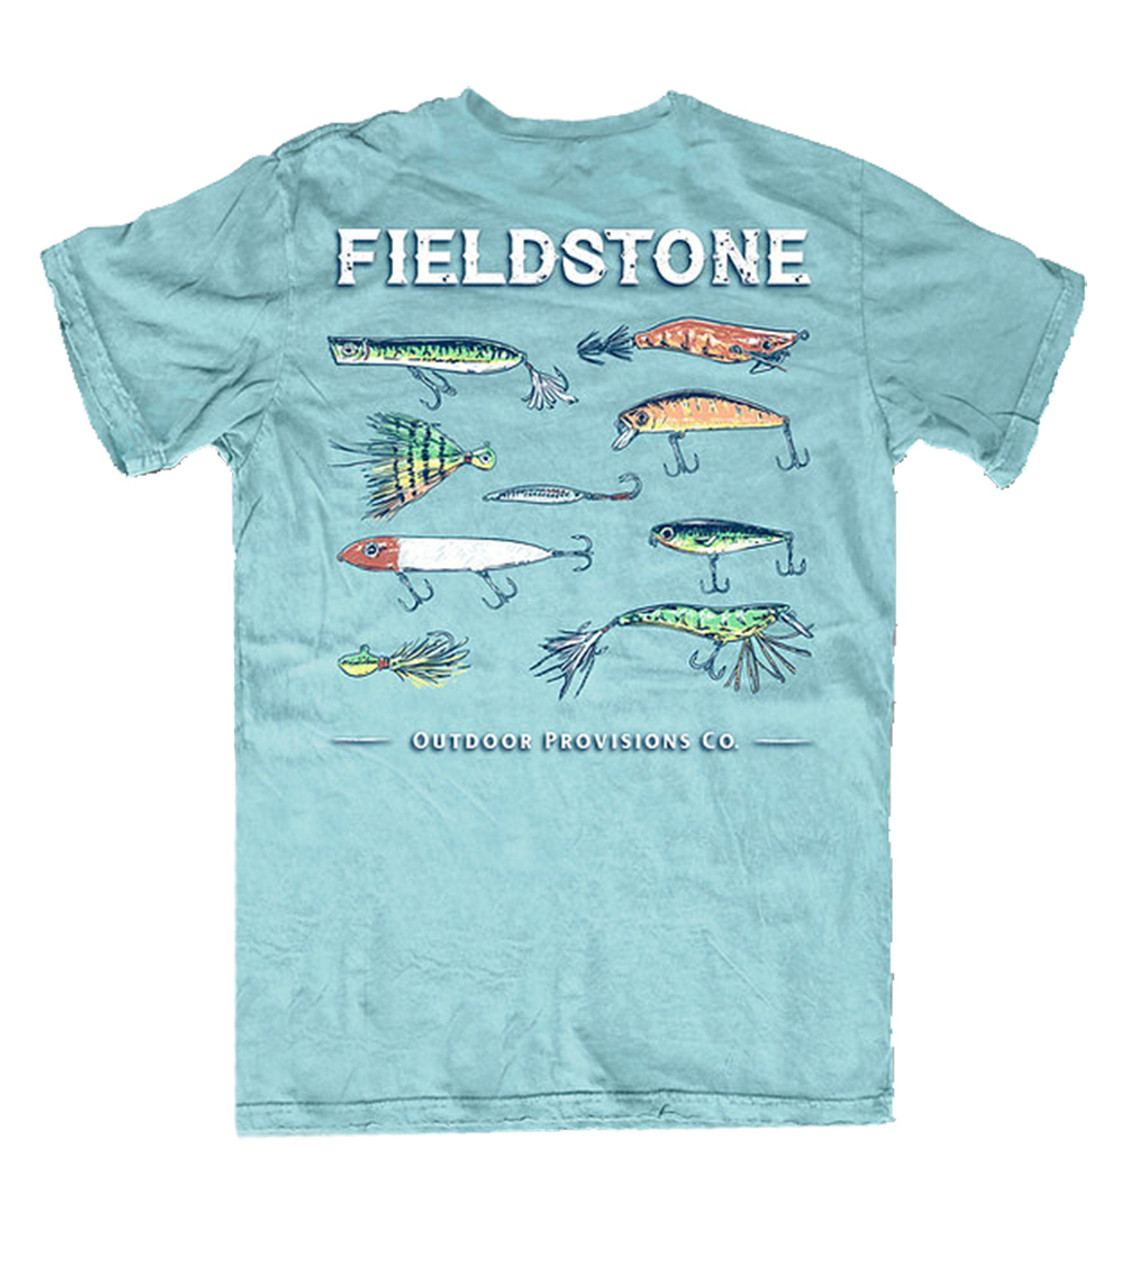 Fieldstone Outdoors Provisions Co. Fishing Lures Comfort Colors Unisex  Short Sleeve T-Shirt